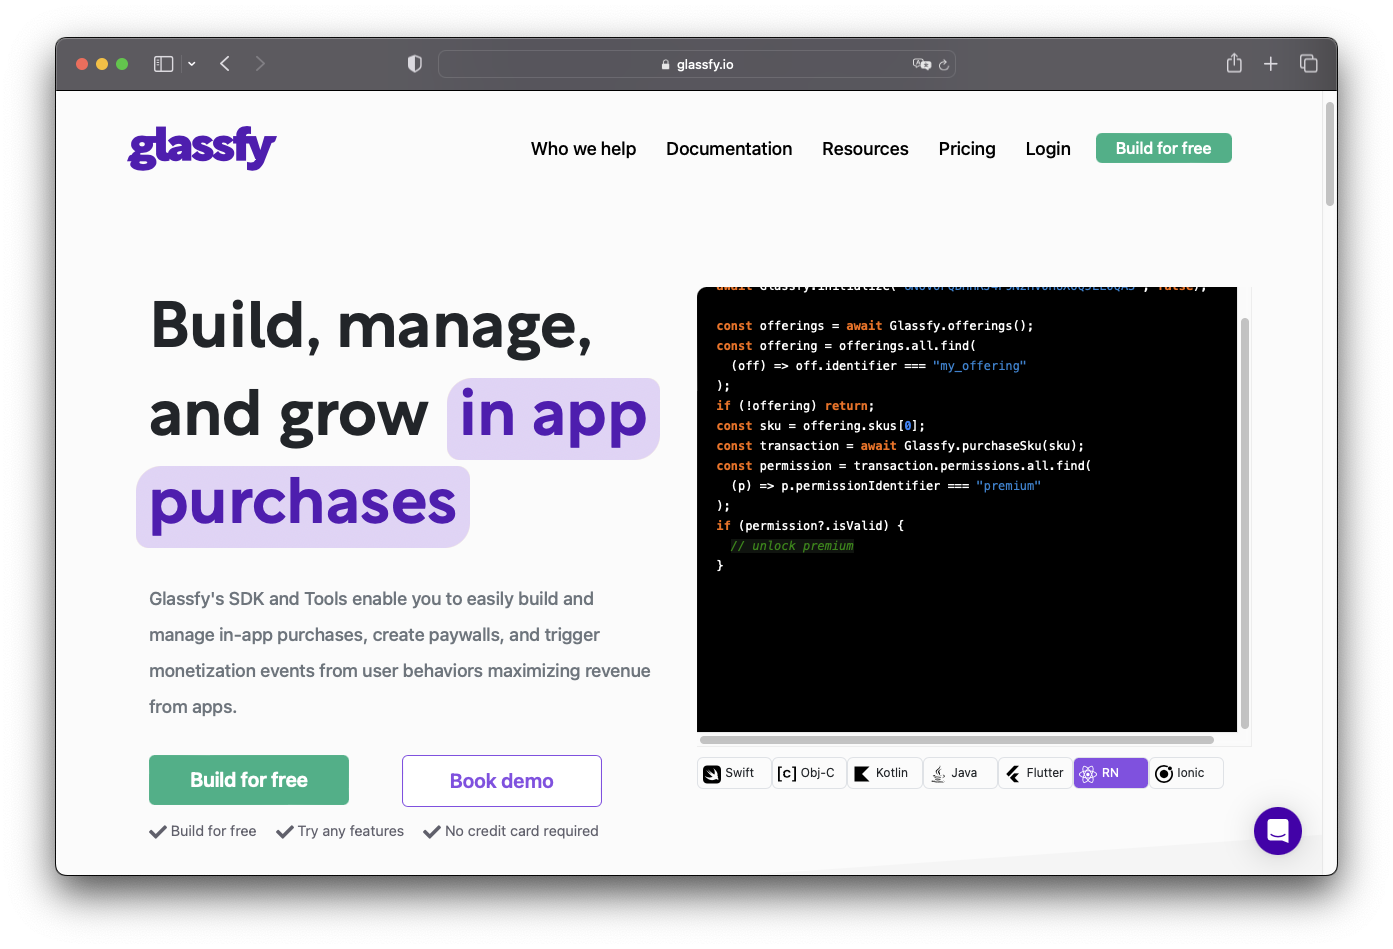 Glassfy Overview